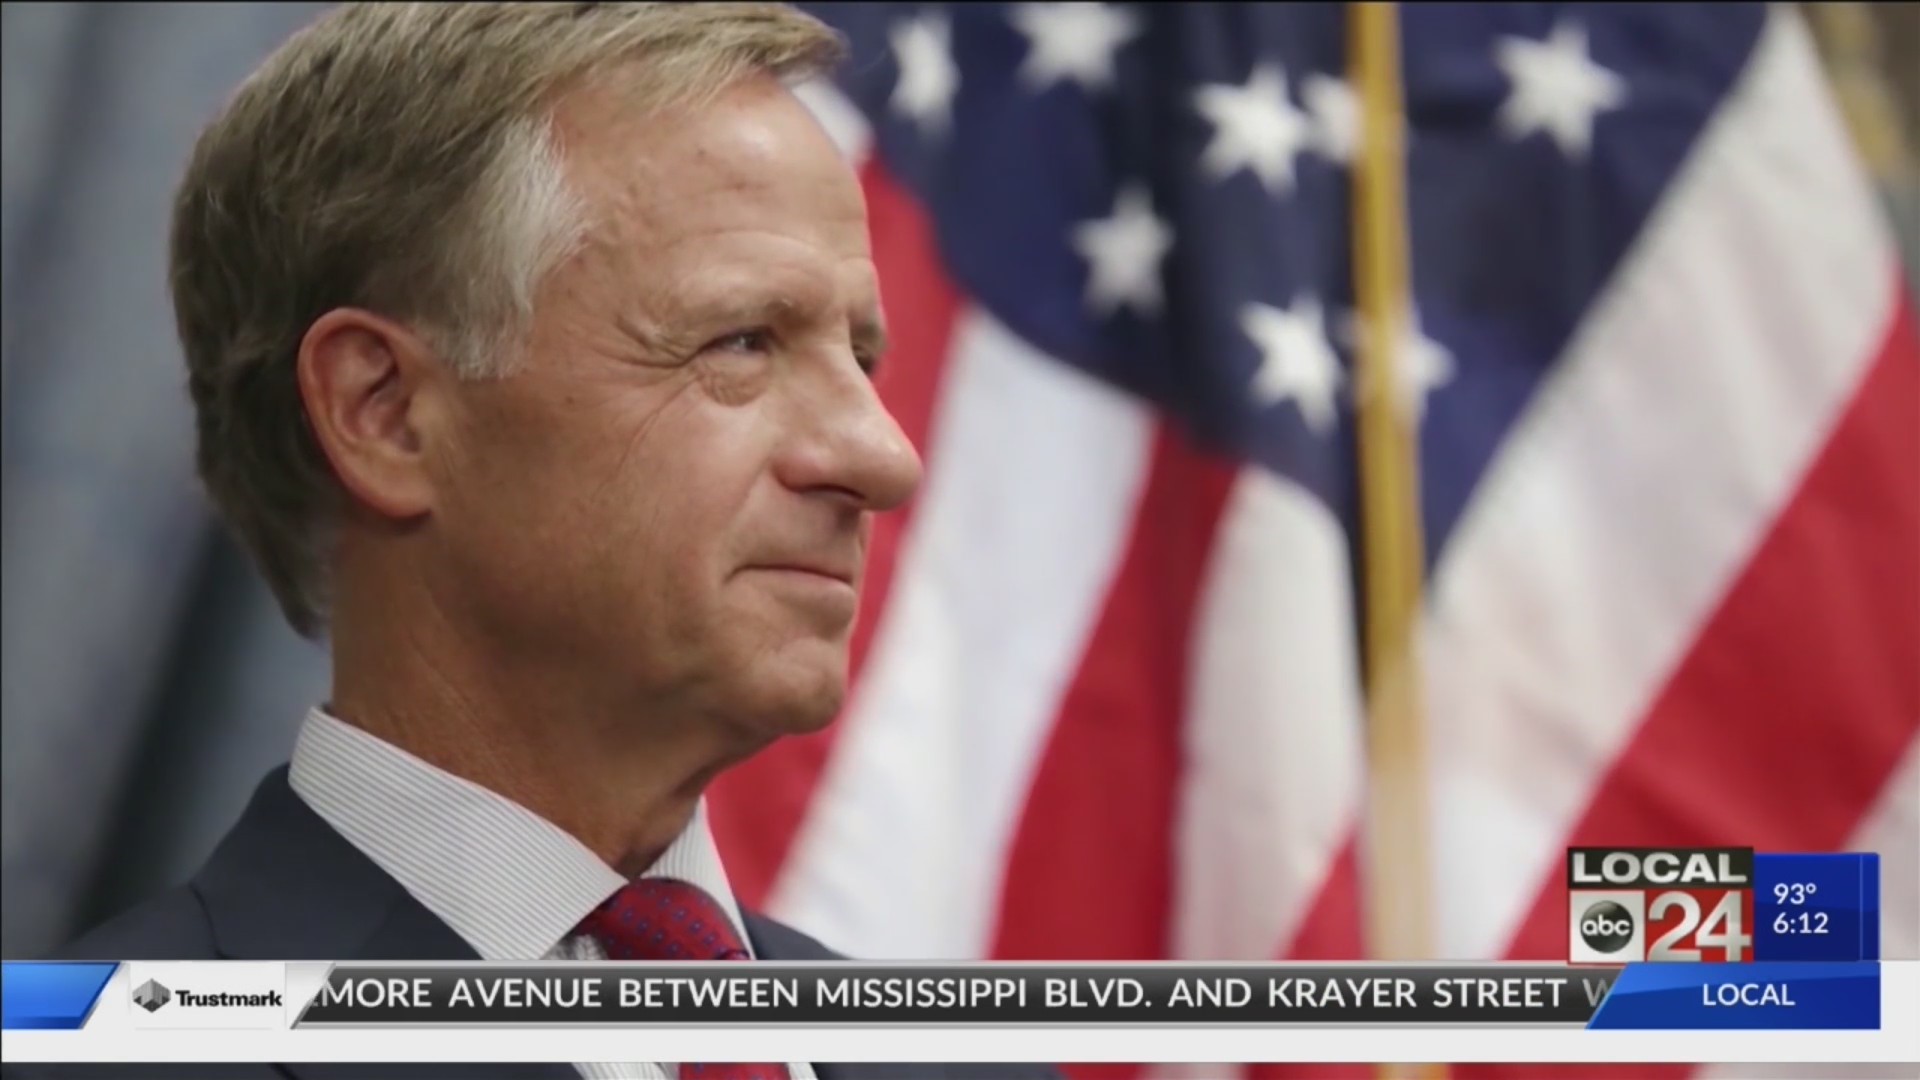 Former Tennessee Governor Bill Haslam to teach political science course at Vanderbilt